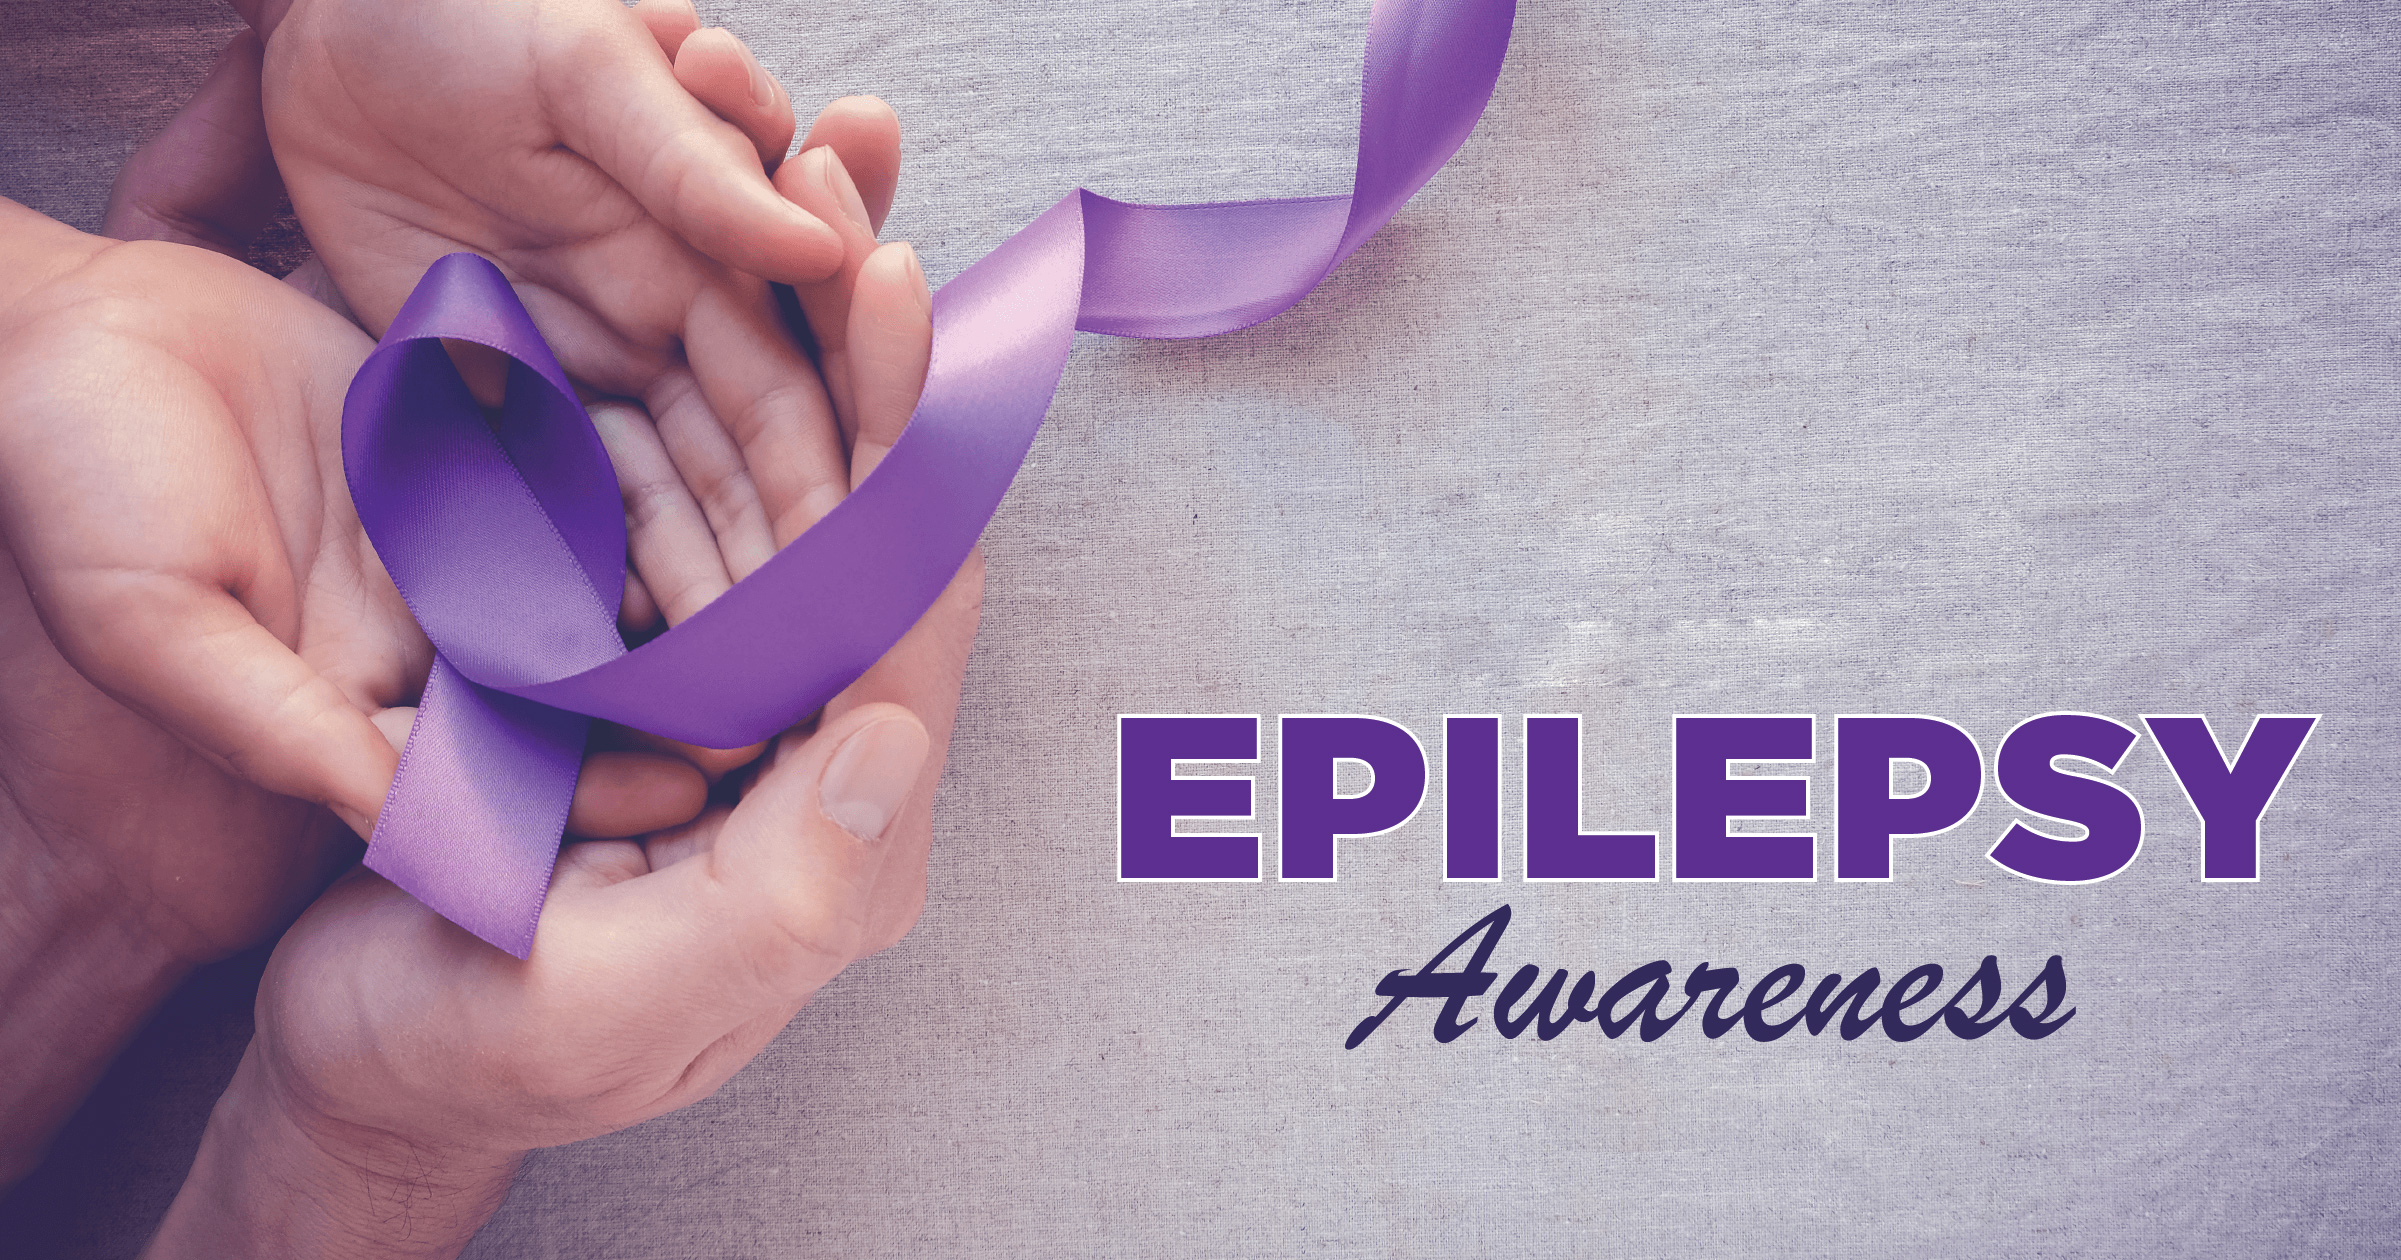 Epilepsy Awareness Research about Epilepsy and Public Awareness